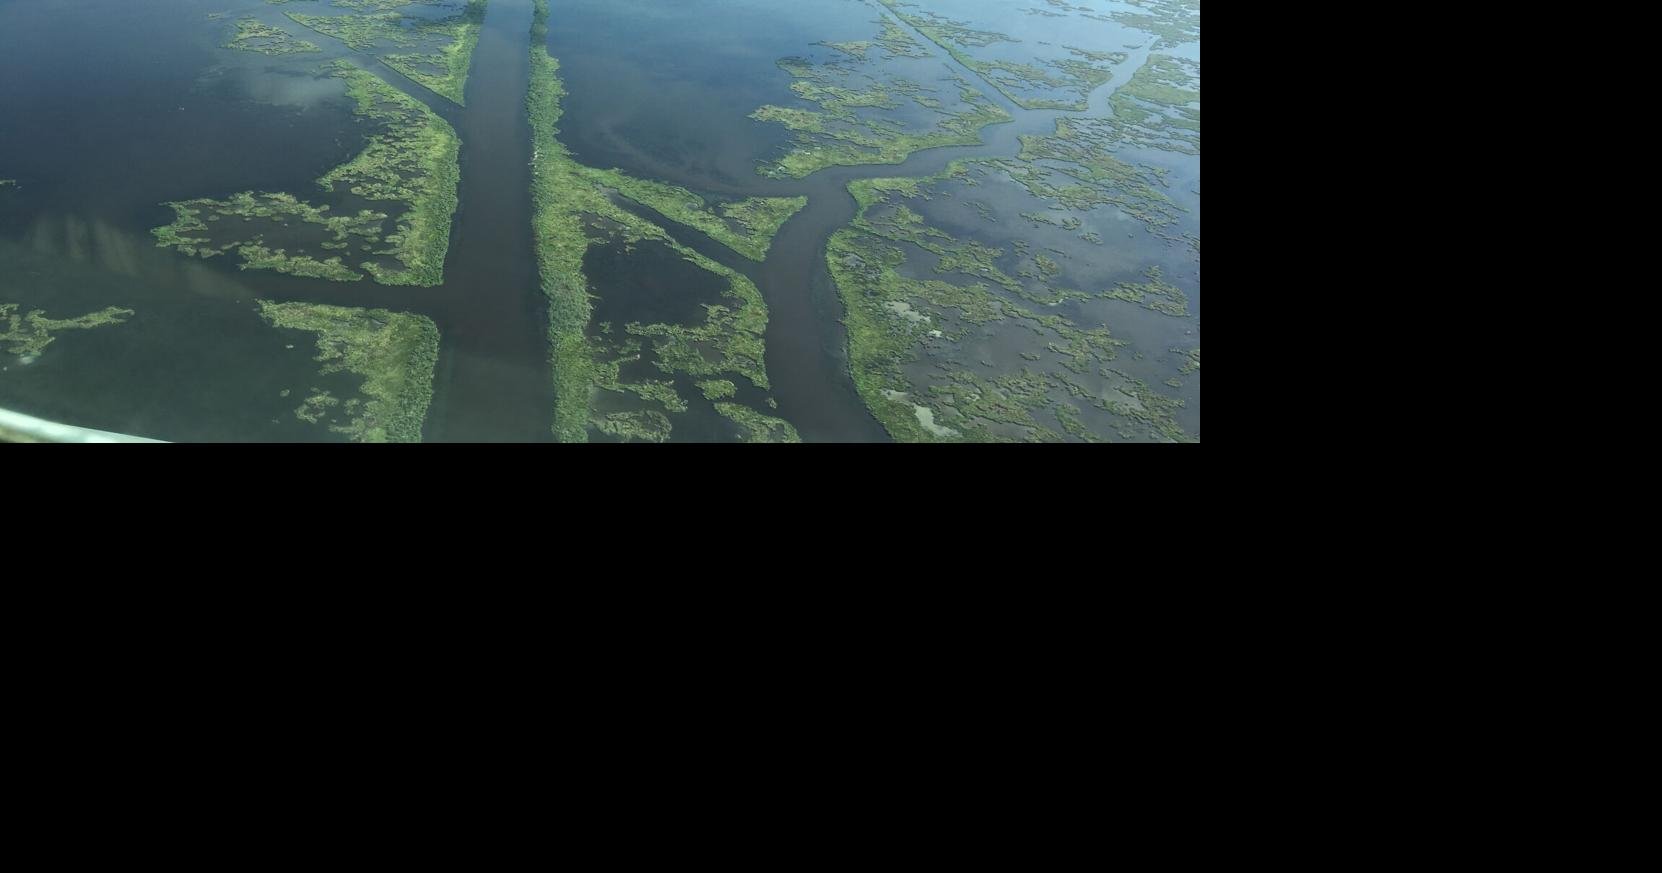 Ruling could result in trials against oil majors over Louisiana wetlands damage